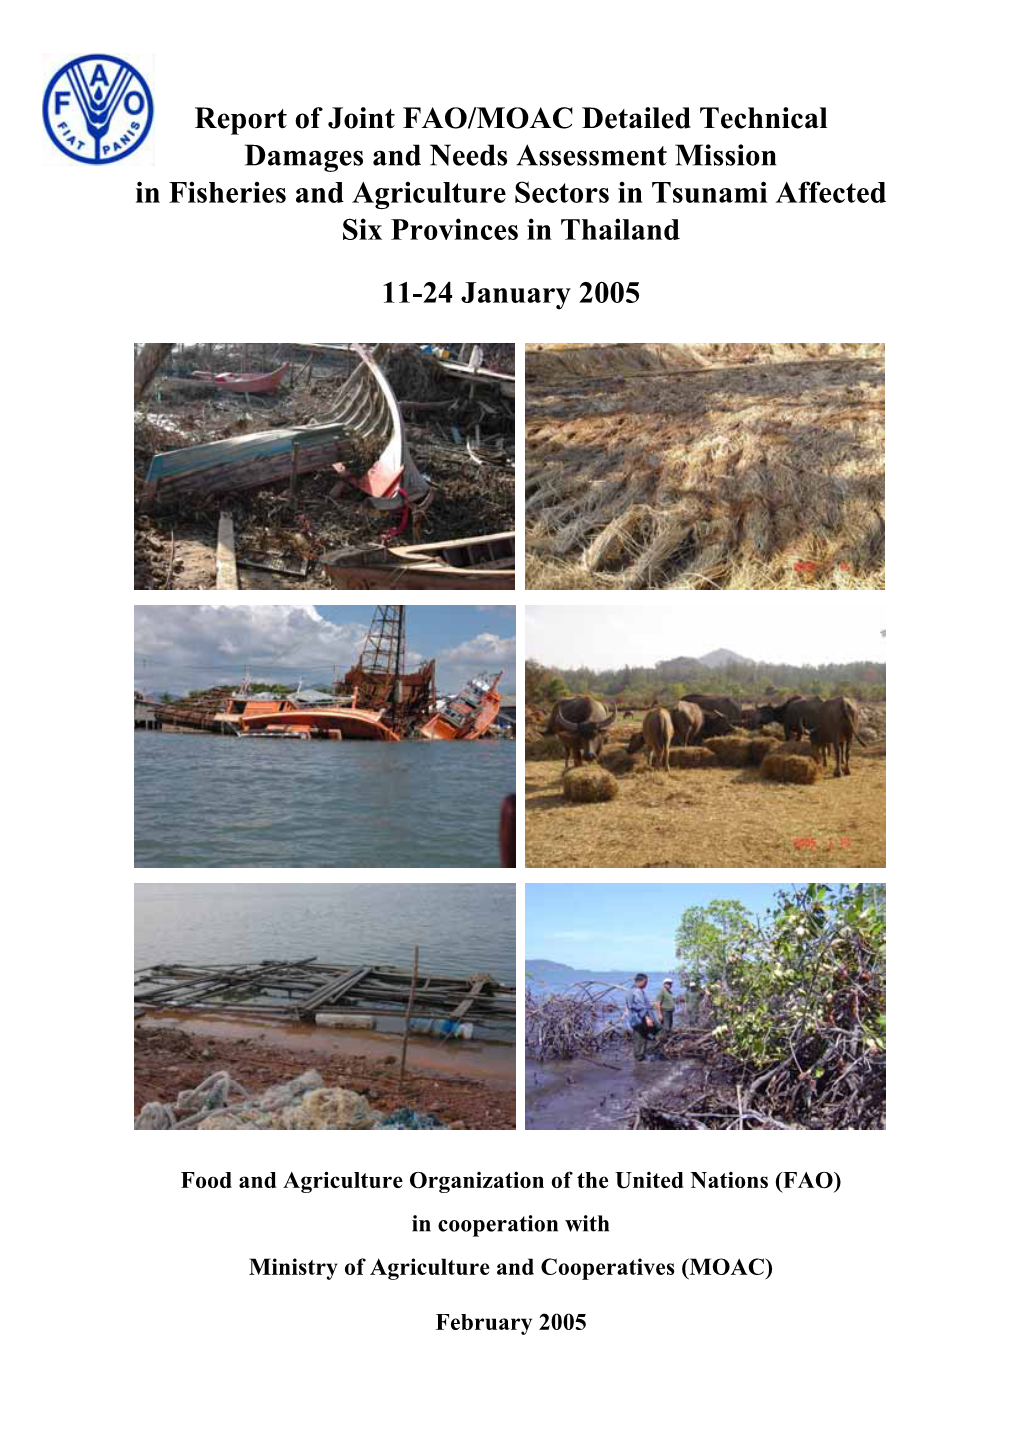 Report of Joint FAO/MOAC Detailed Technical Damages and Needs Assessment Mission in Fisheries and Agriculture Sectors in Tsunami Affected Six Provinces in Thailand